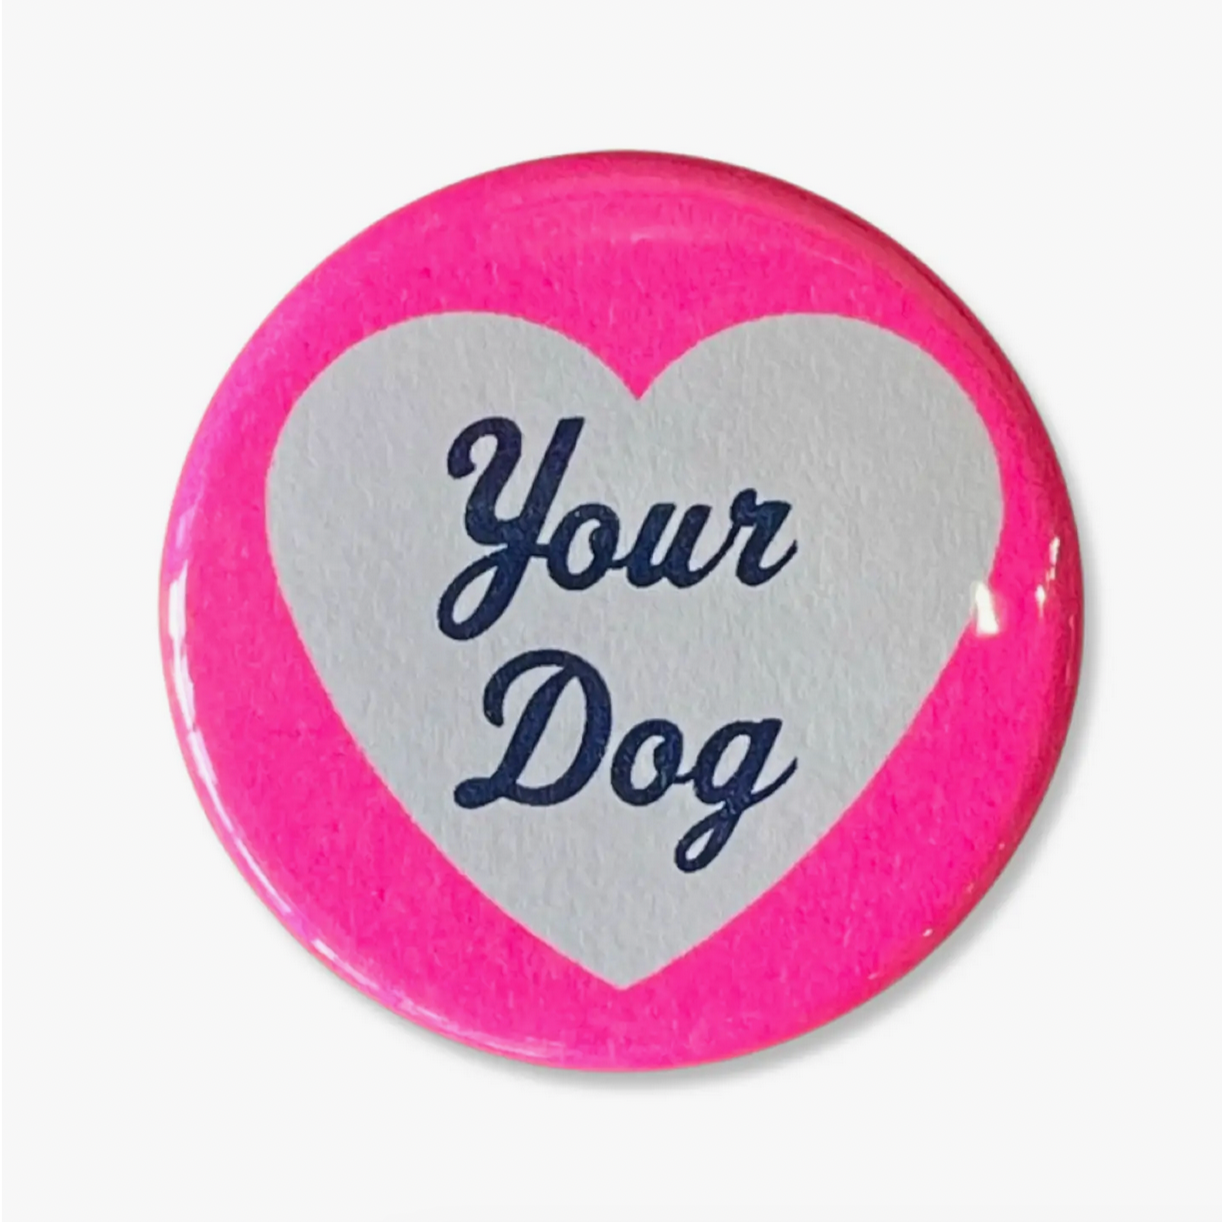 I Love Your Dog Button - 1.75"